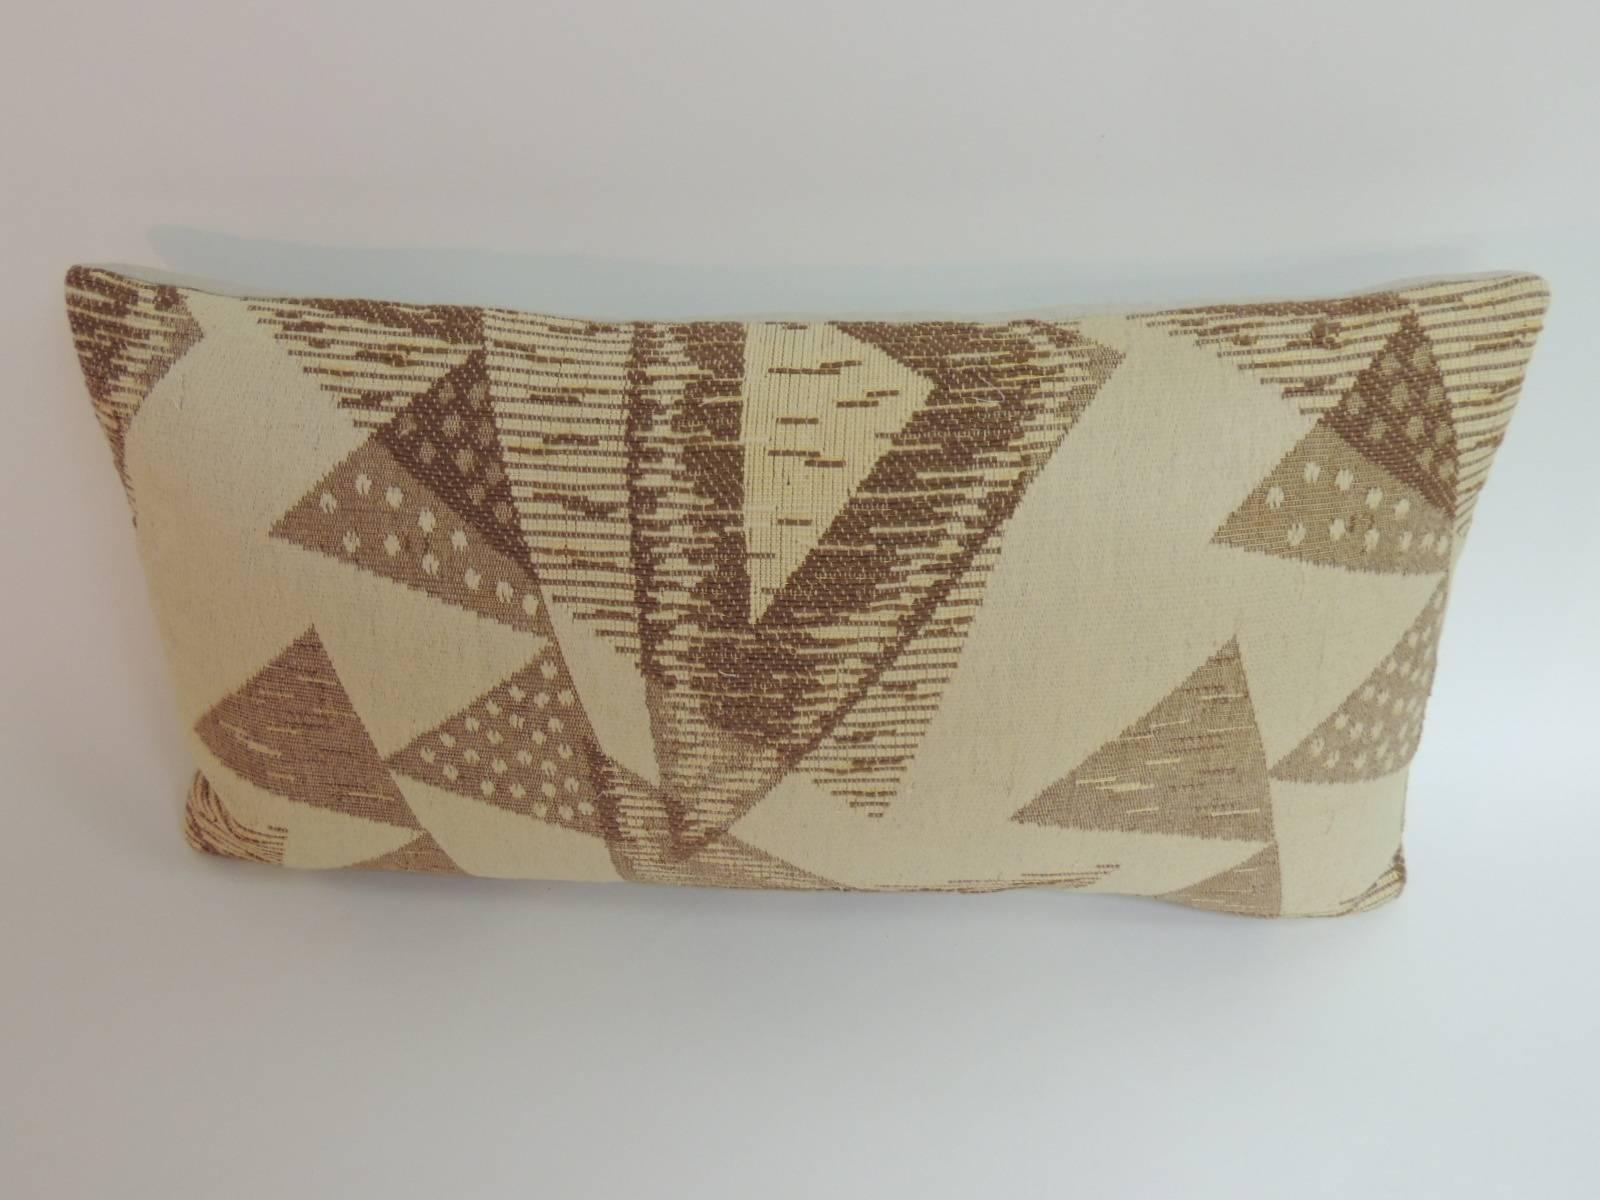 Vintage Art Deco style woven bolster decorative pillow with textured tan linen backing. Front textile panel from 1960s Belgium has been reinforced to add strength to the pillow. Decorative pillow was handcrafted and designed in the USA. Custom-made